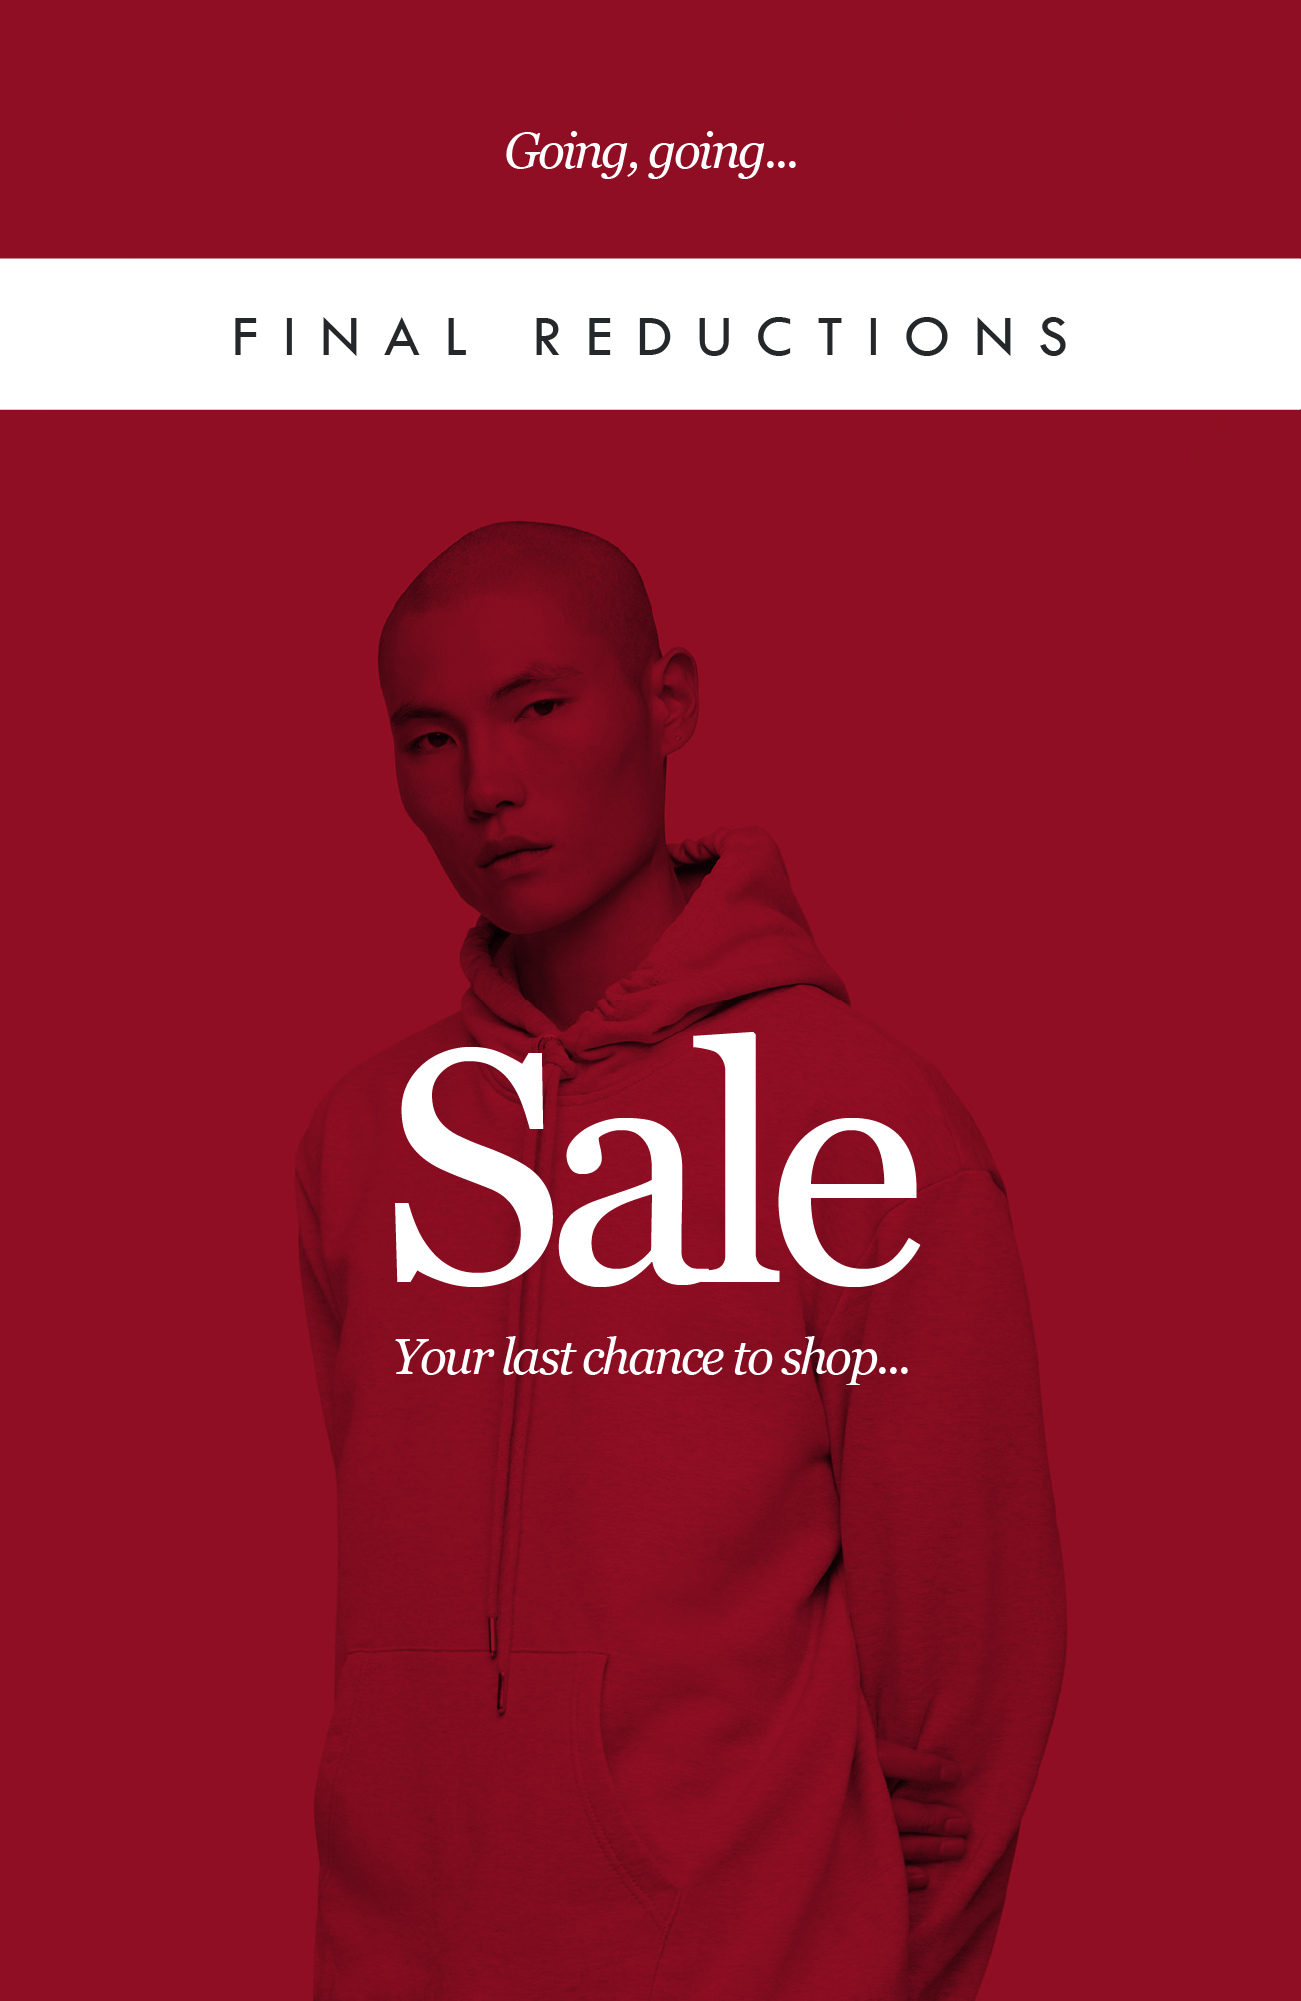 Going, going...

FINAL REDUCTIONS

Sale
Your last chance to shop...